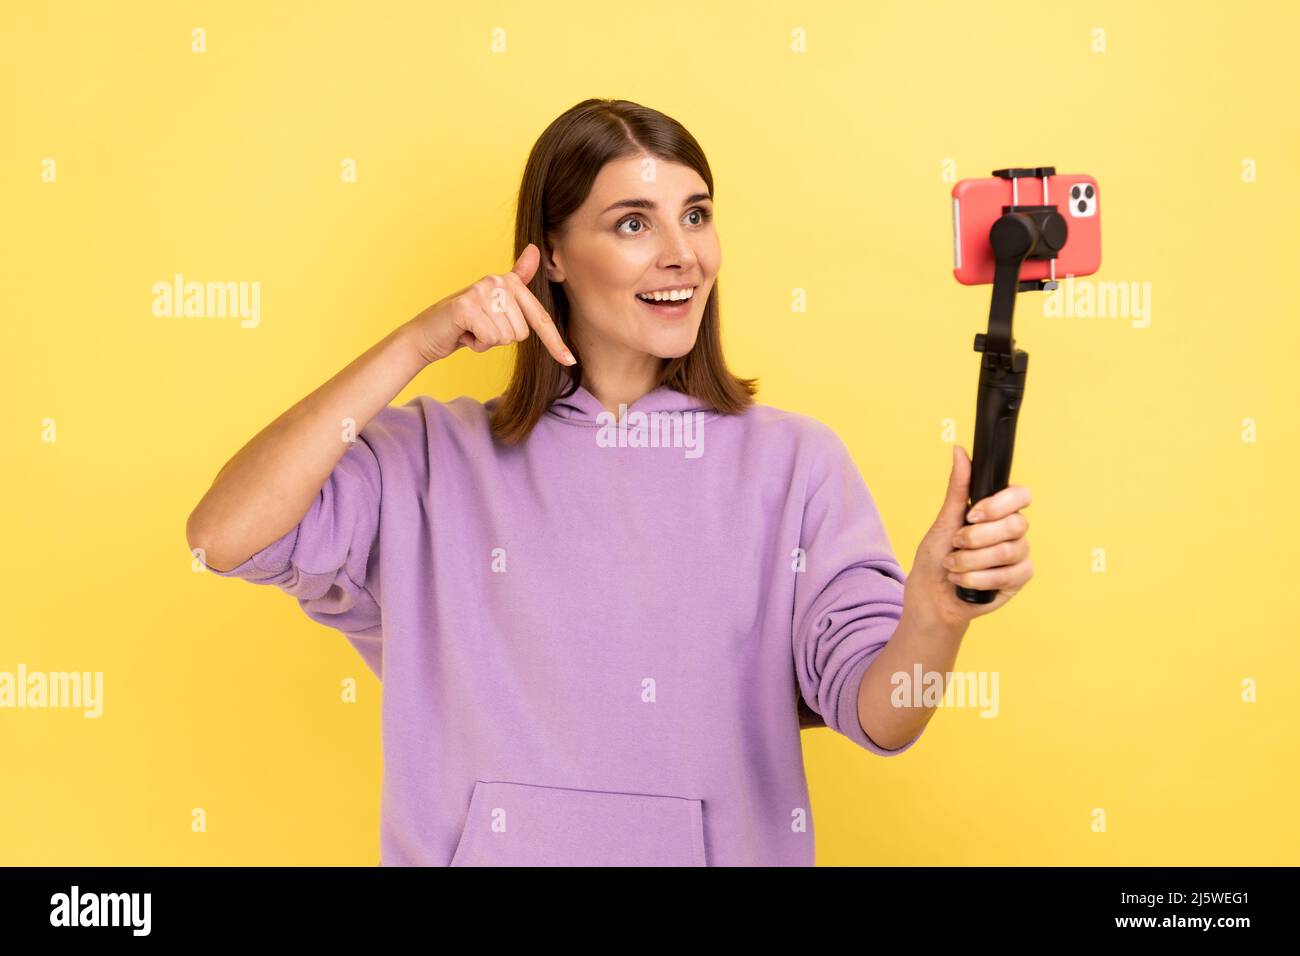 Portrait of woman using cell phone and steadicam for broadcasting livestream, pointing down, asking to subscribe, wearing purple hoodie. Indoor studio shot isolated on yellow background. Stock Photo